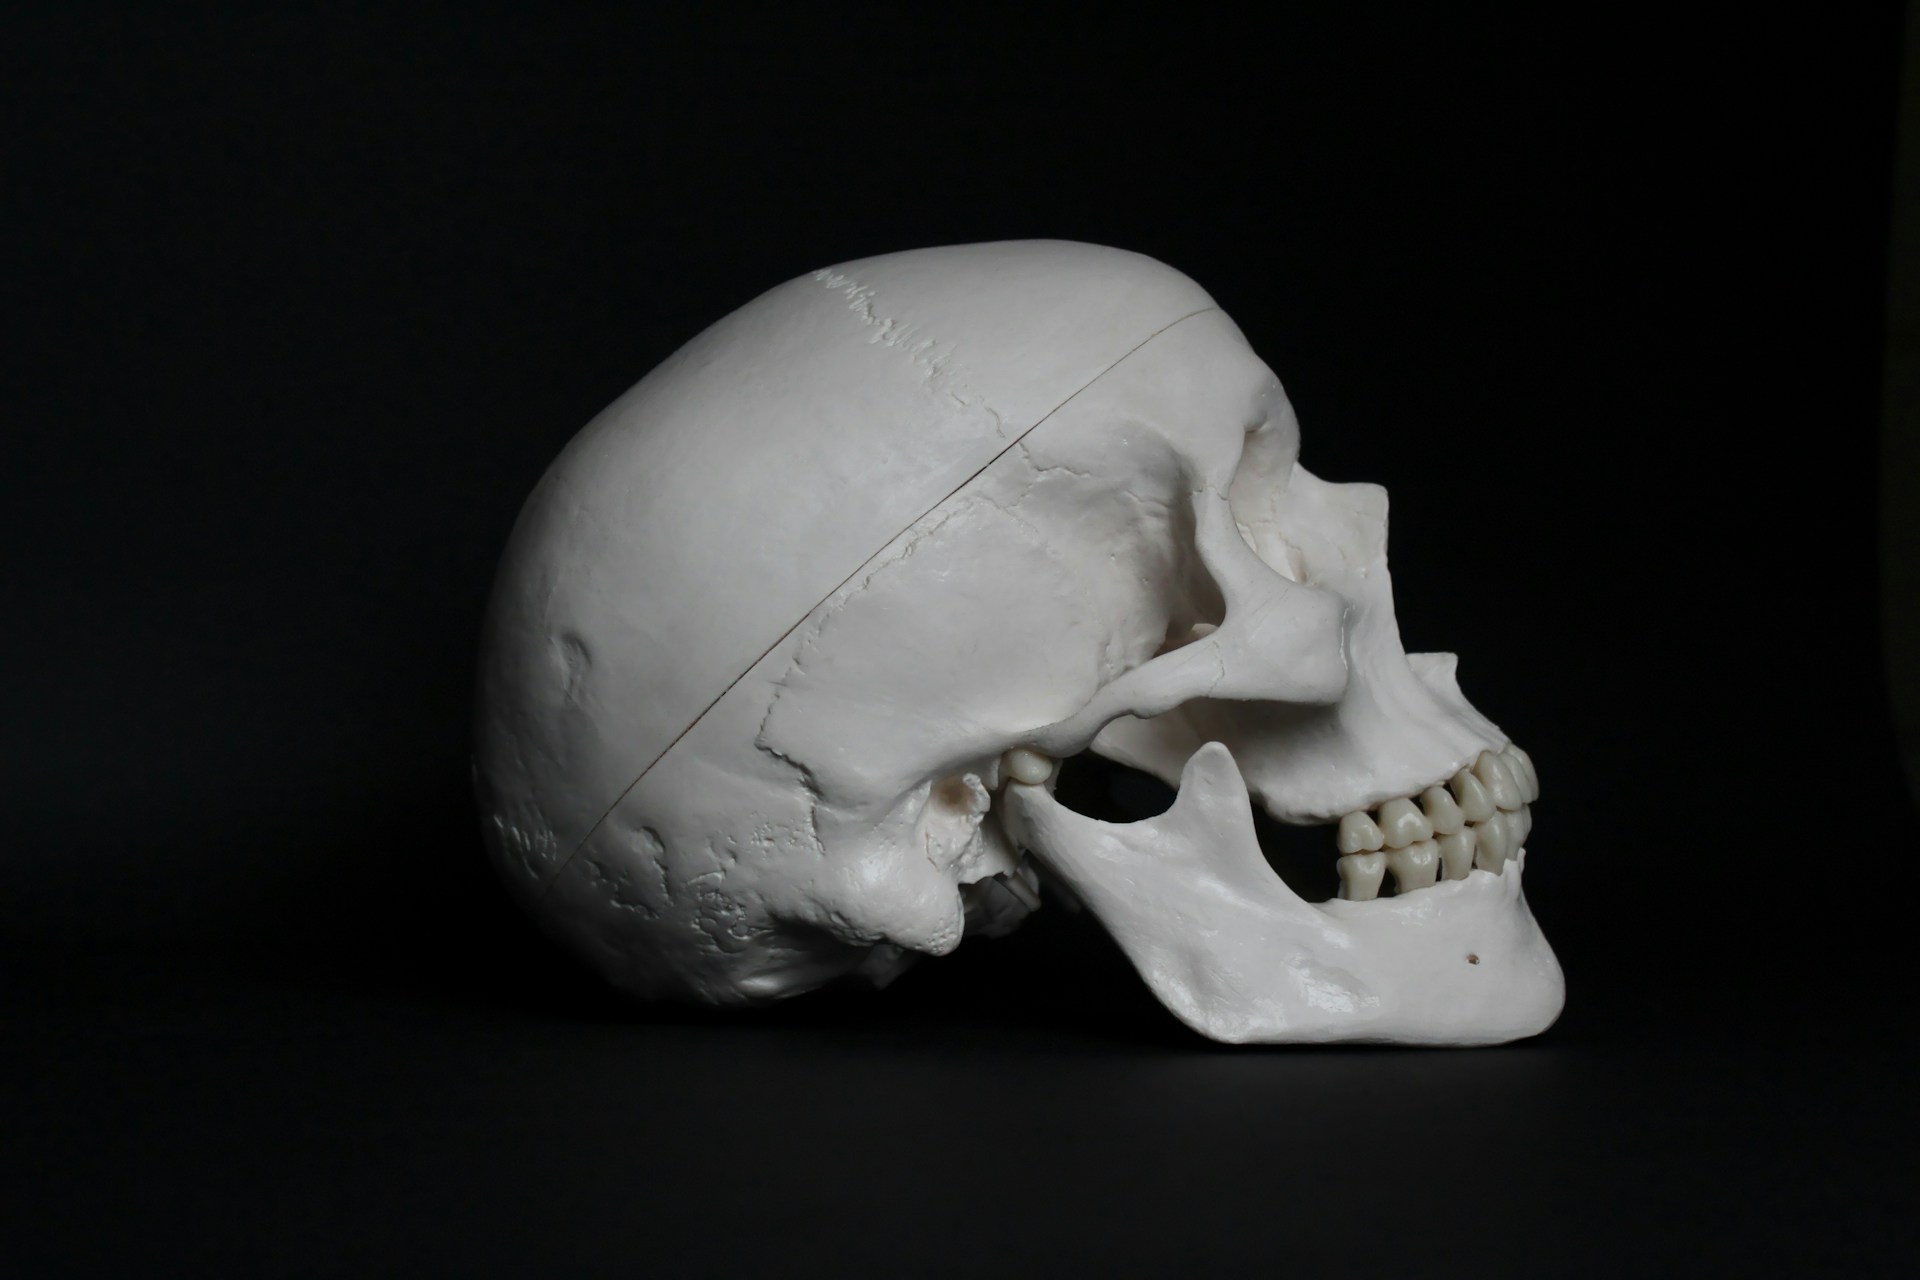 What Are the Problems Facing Those With Temporomandibular Joint Disorders?